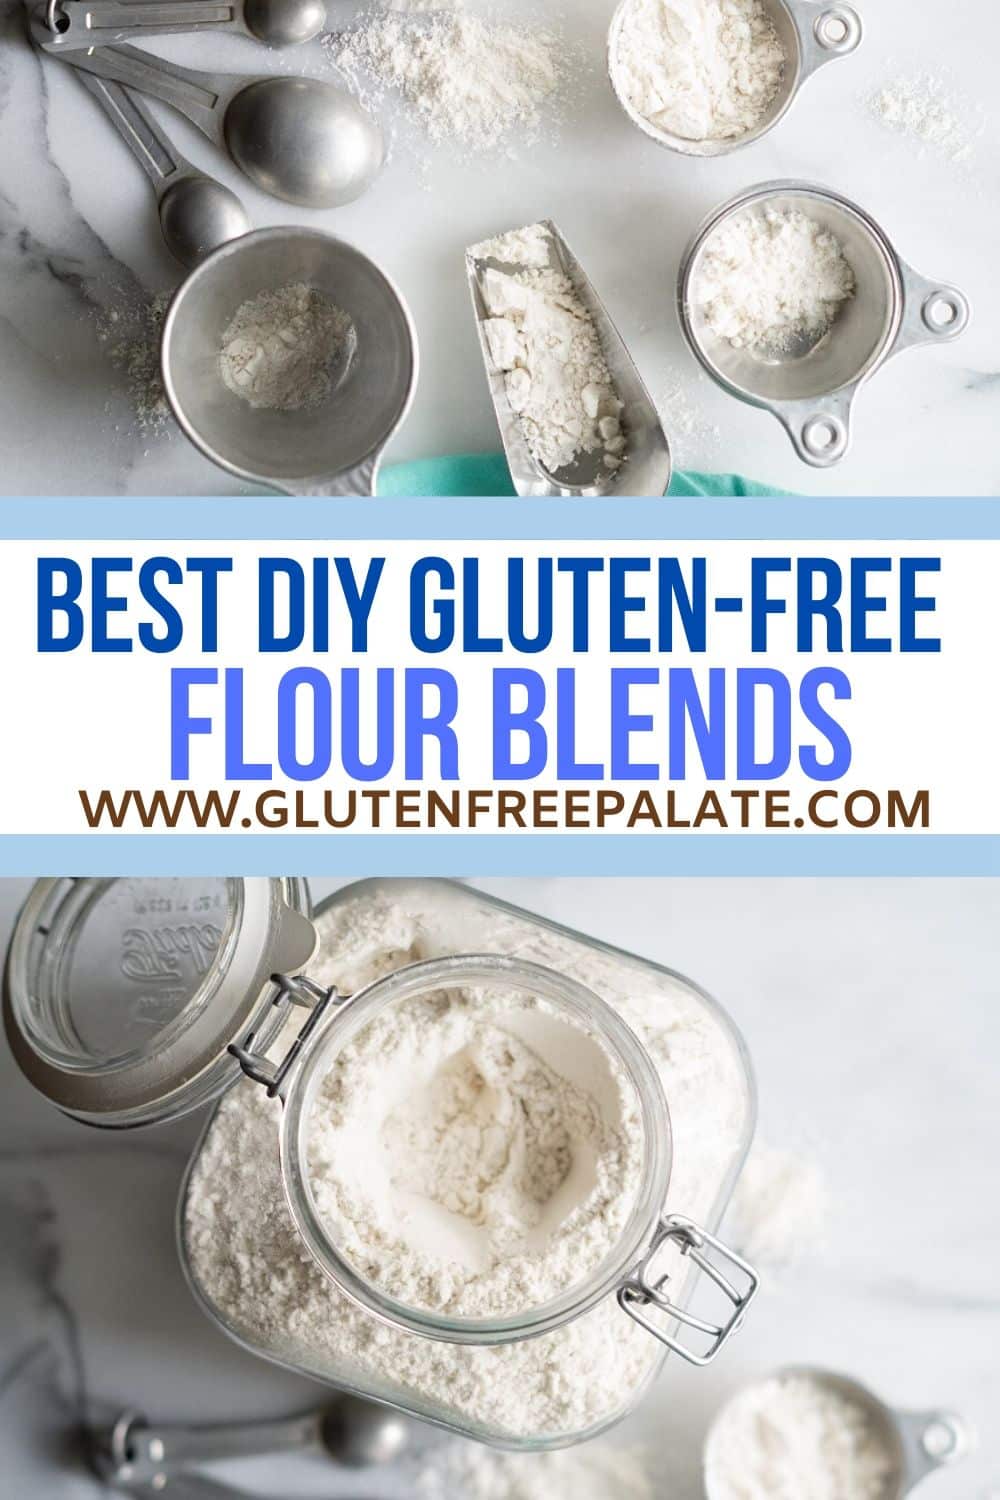 9 Tips for Baking and Cooking with Gluten-Free Flour